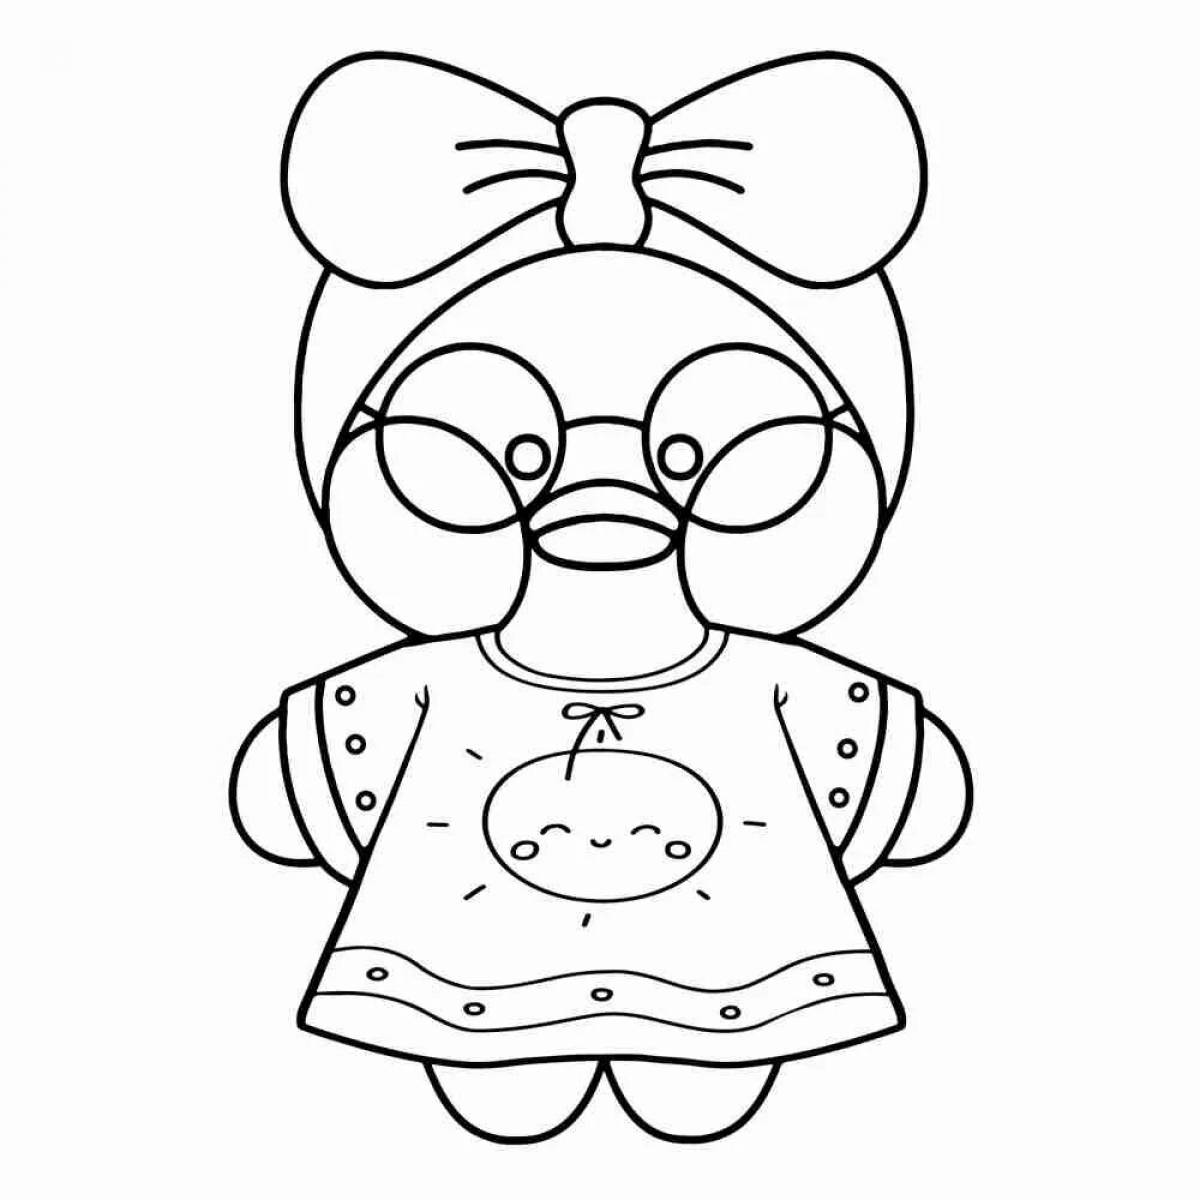 Lalafanfan duck house coloring page